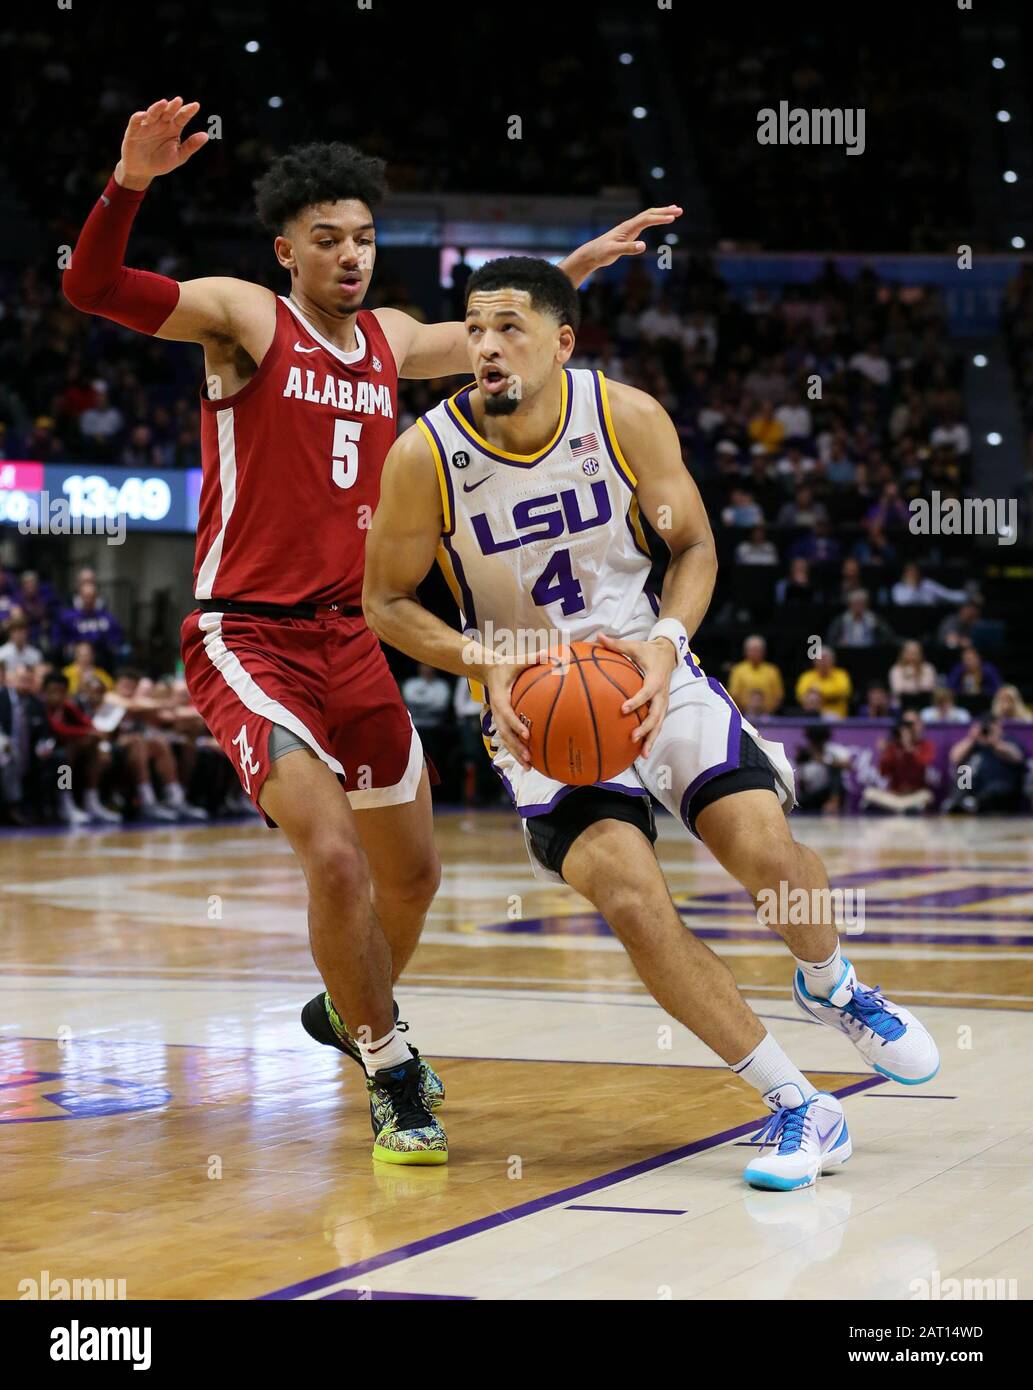 Baton Rouge, LA, USA. 29th Jan, 2020. LSU's Skylar Mays (4) drives around Alabama's Jaden Shackelford (5) during NCAA Basketball action between the Alabama Crimson Tide and the LSU Tigers at the Pete Maravich Assembly Center in Baton Rouge, LA. Jonathan Mailhes/CSM/Alamy Live News Stock Photo